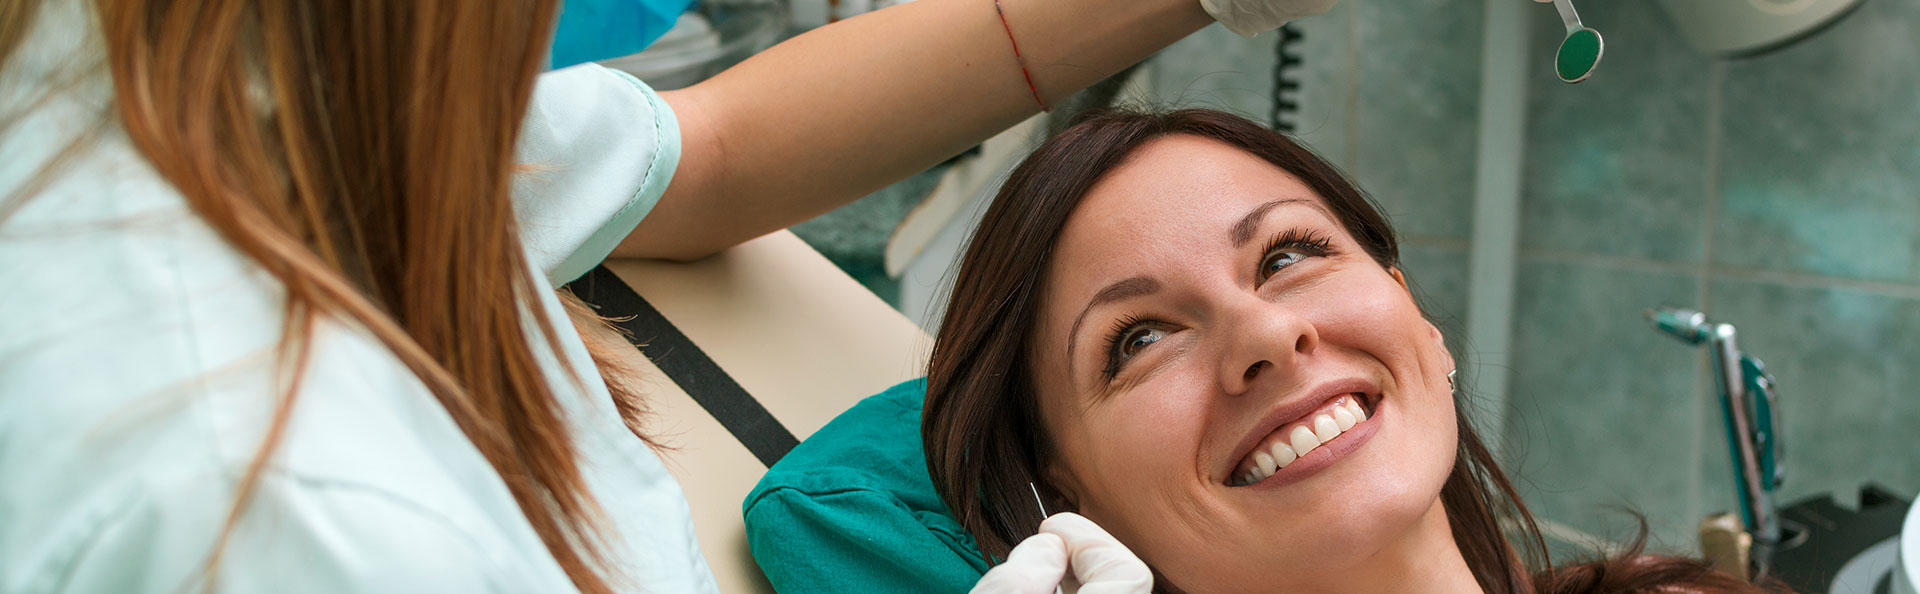 Woman smiling after dental fillings